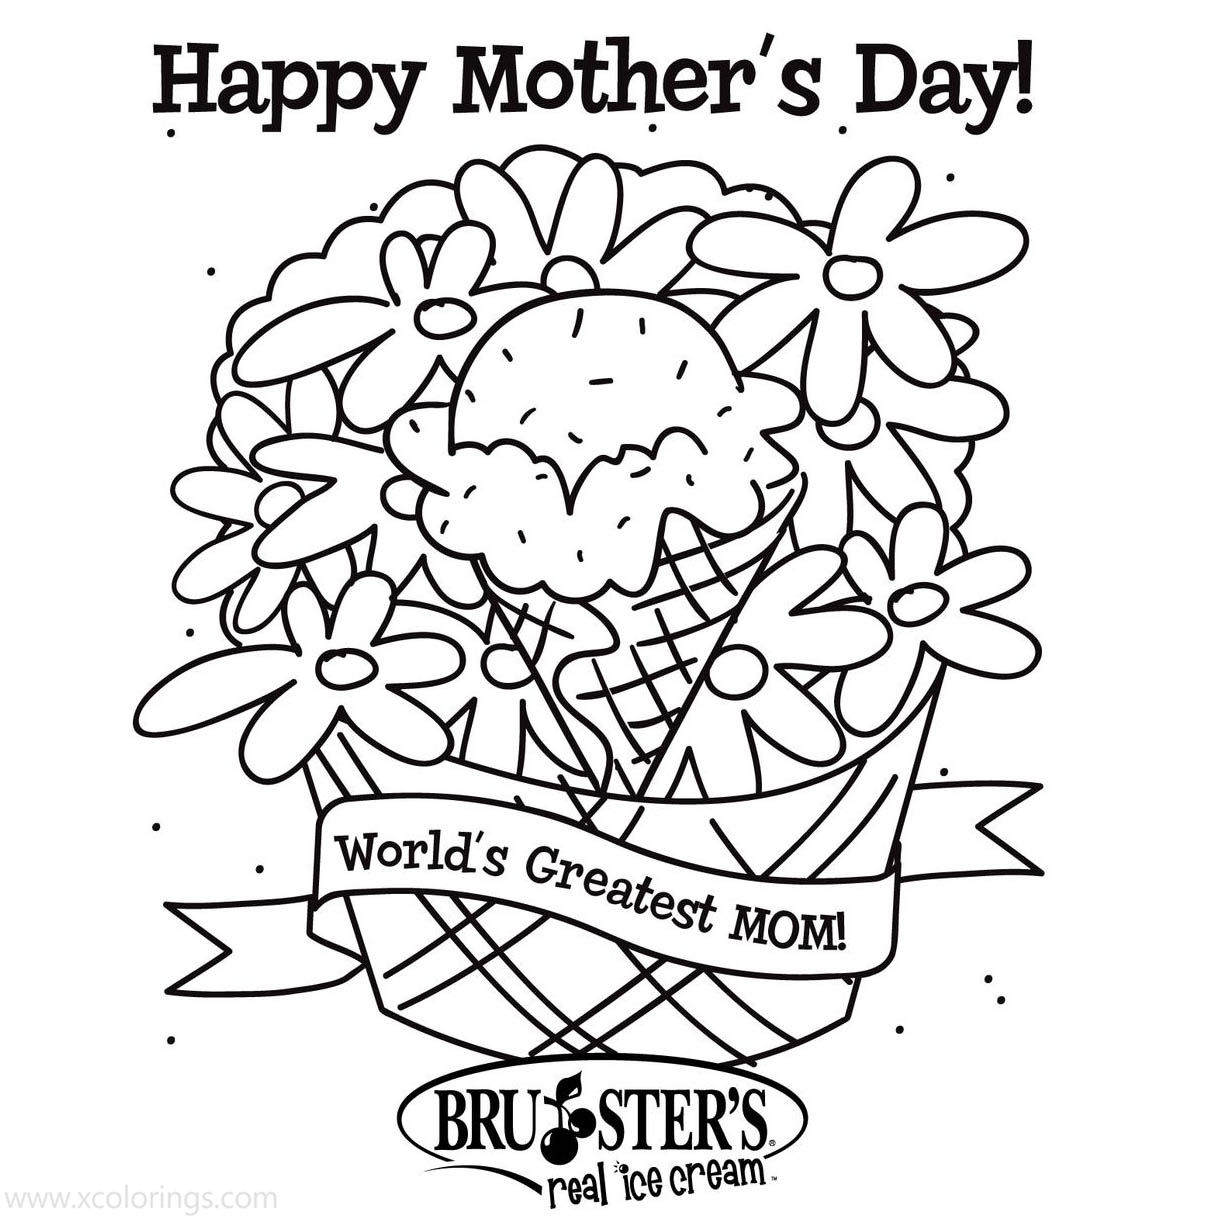 Free Mother's Day Coloring Pages Greatest Mom printable